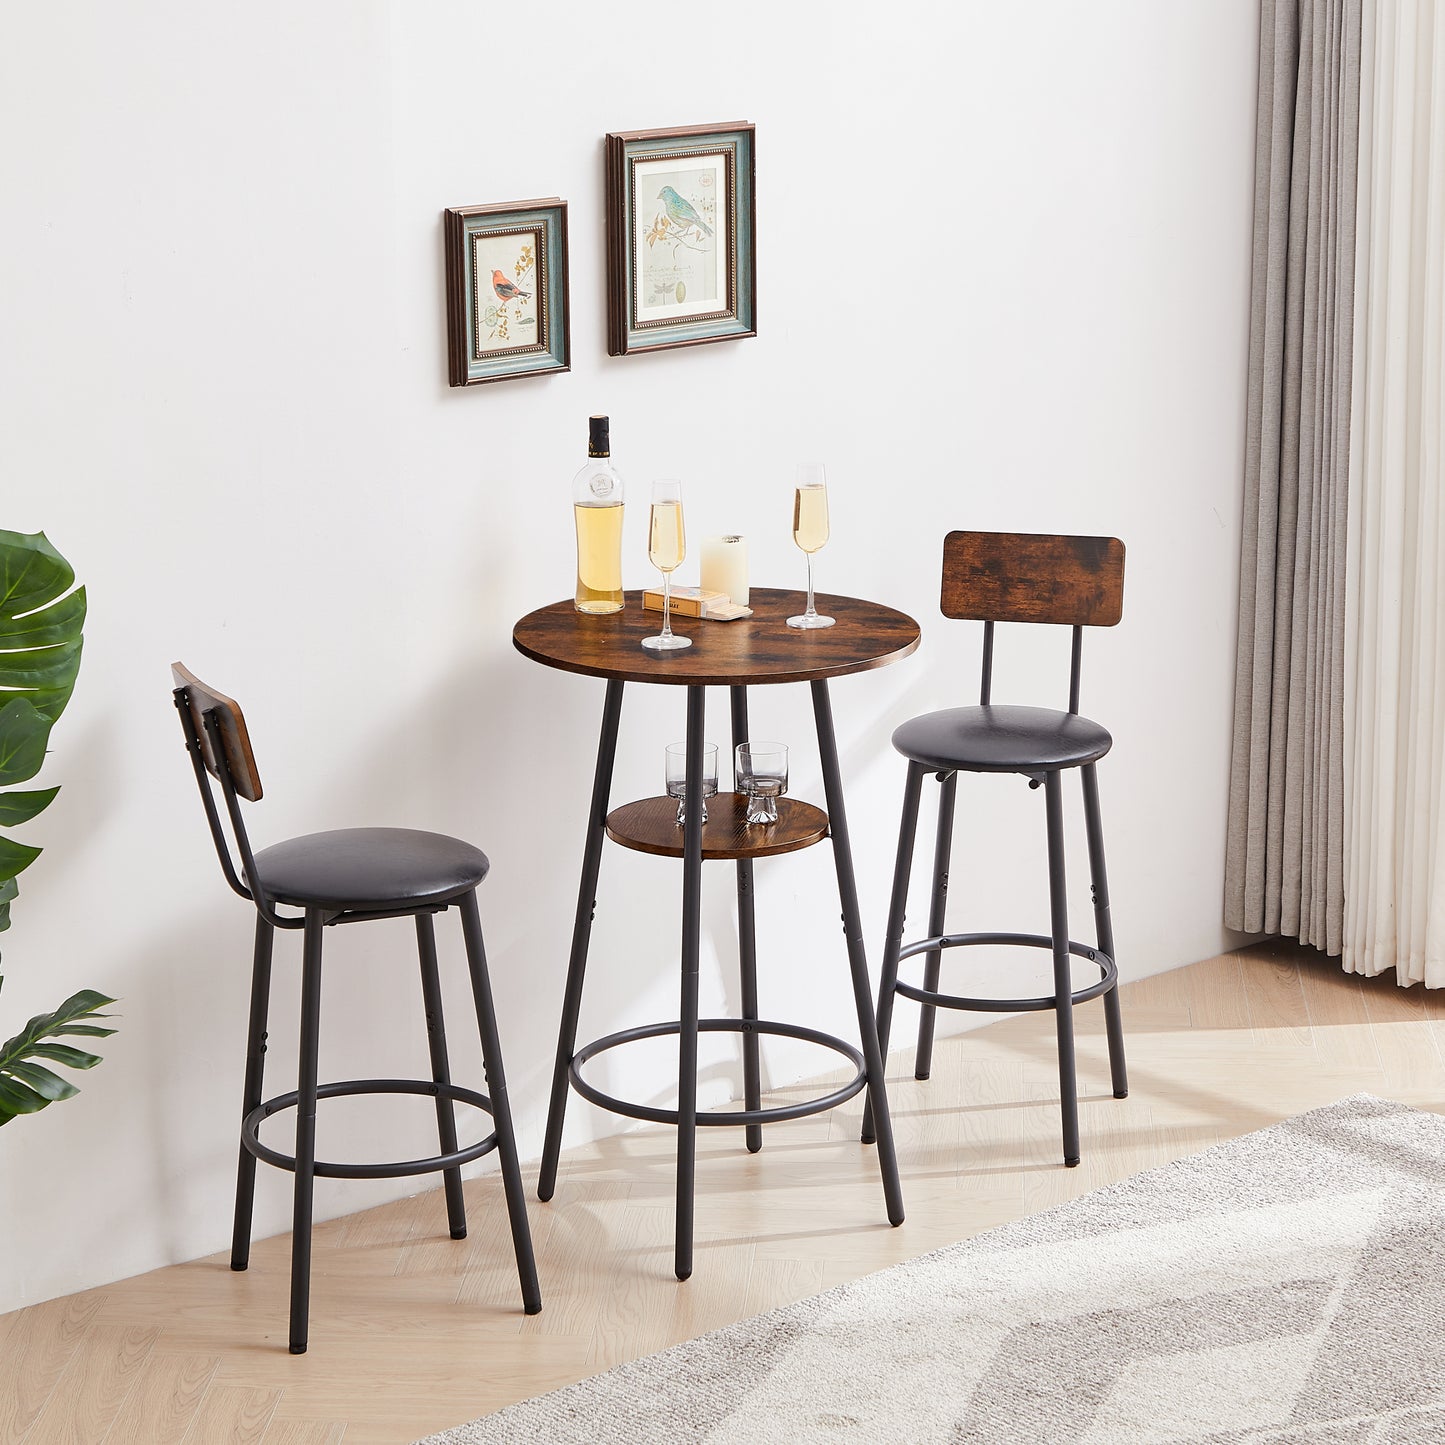 Round bar stool set with shelf, upholstered stool with backrest, Rustic Brown, 23.62'' W x 23.62'' D x 35.43'' H